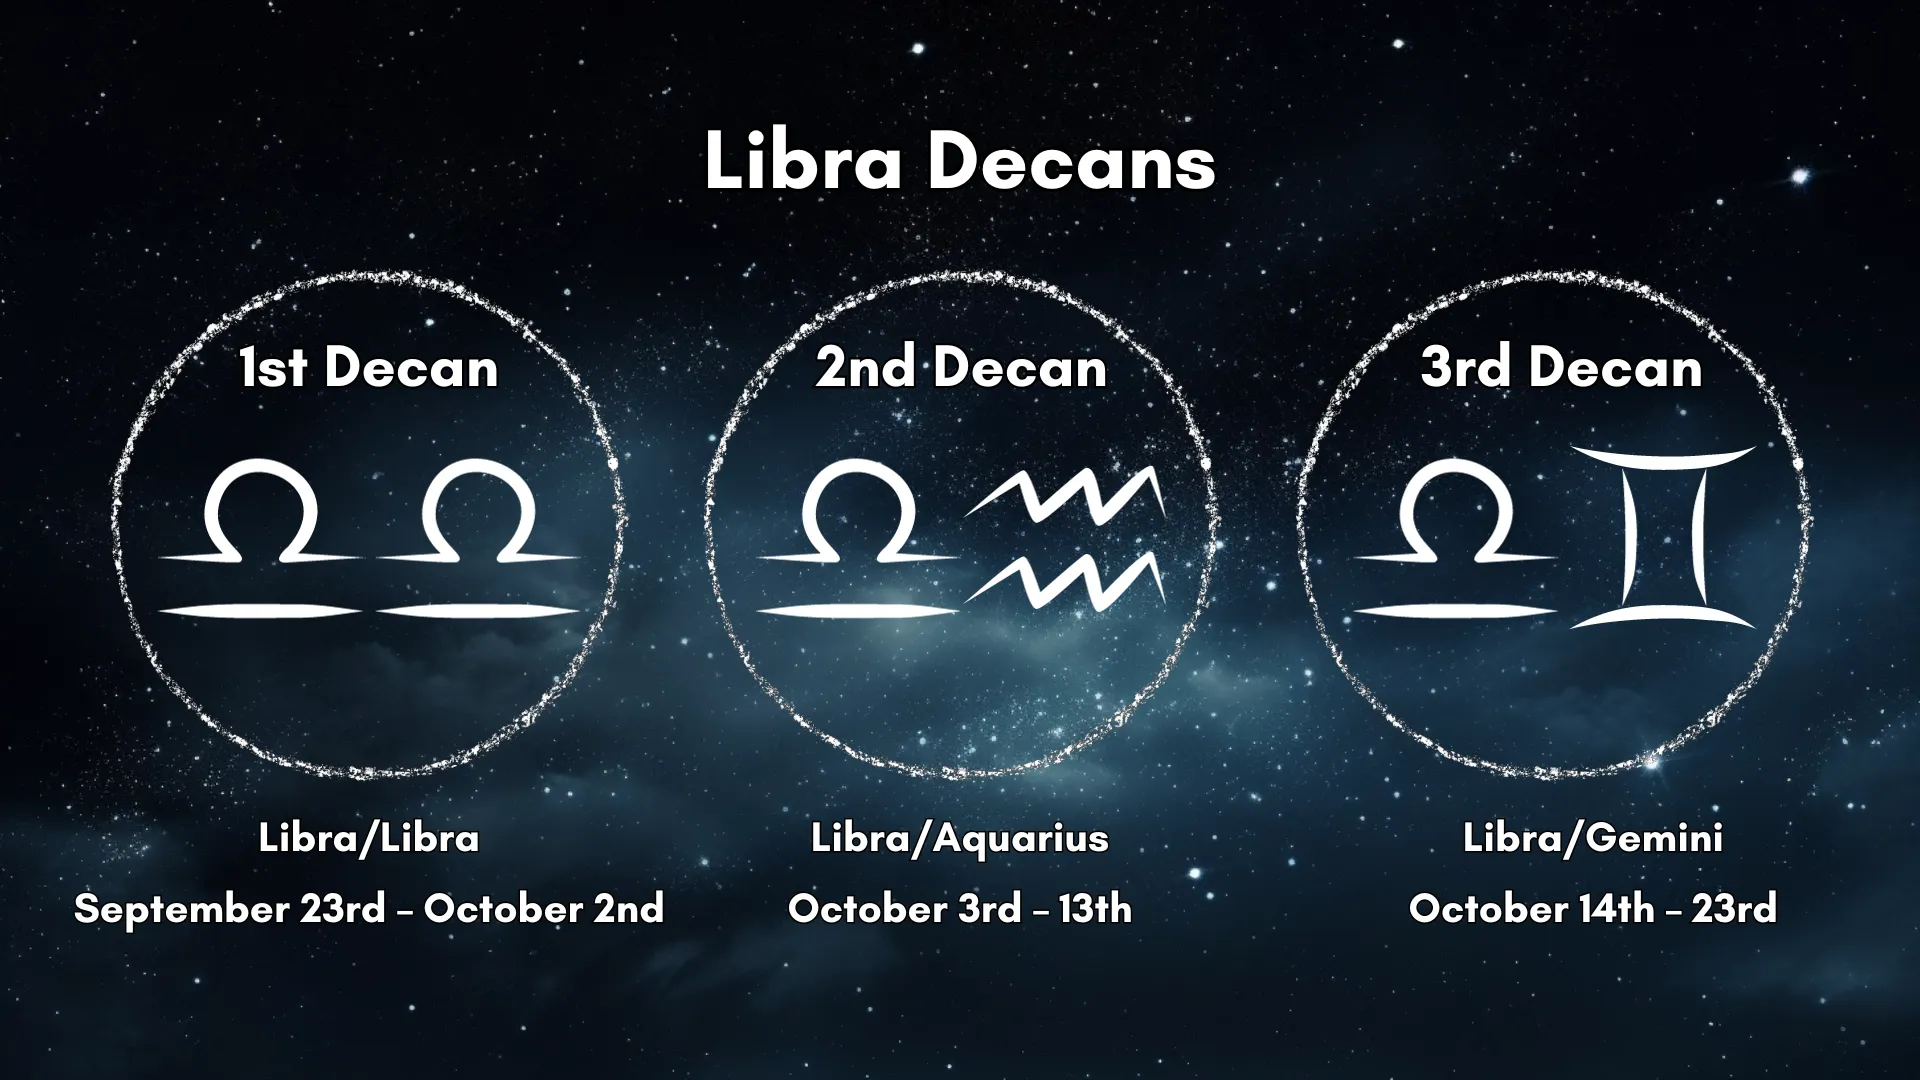 The Libra Decans are laid out in a chart that is easy to understand.